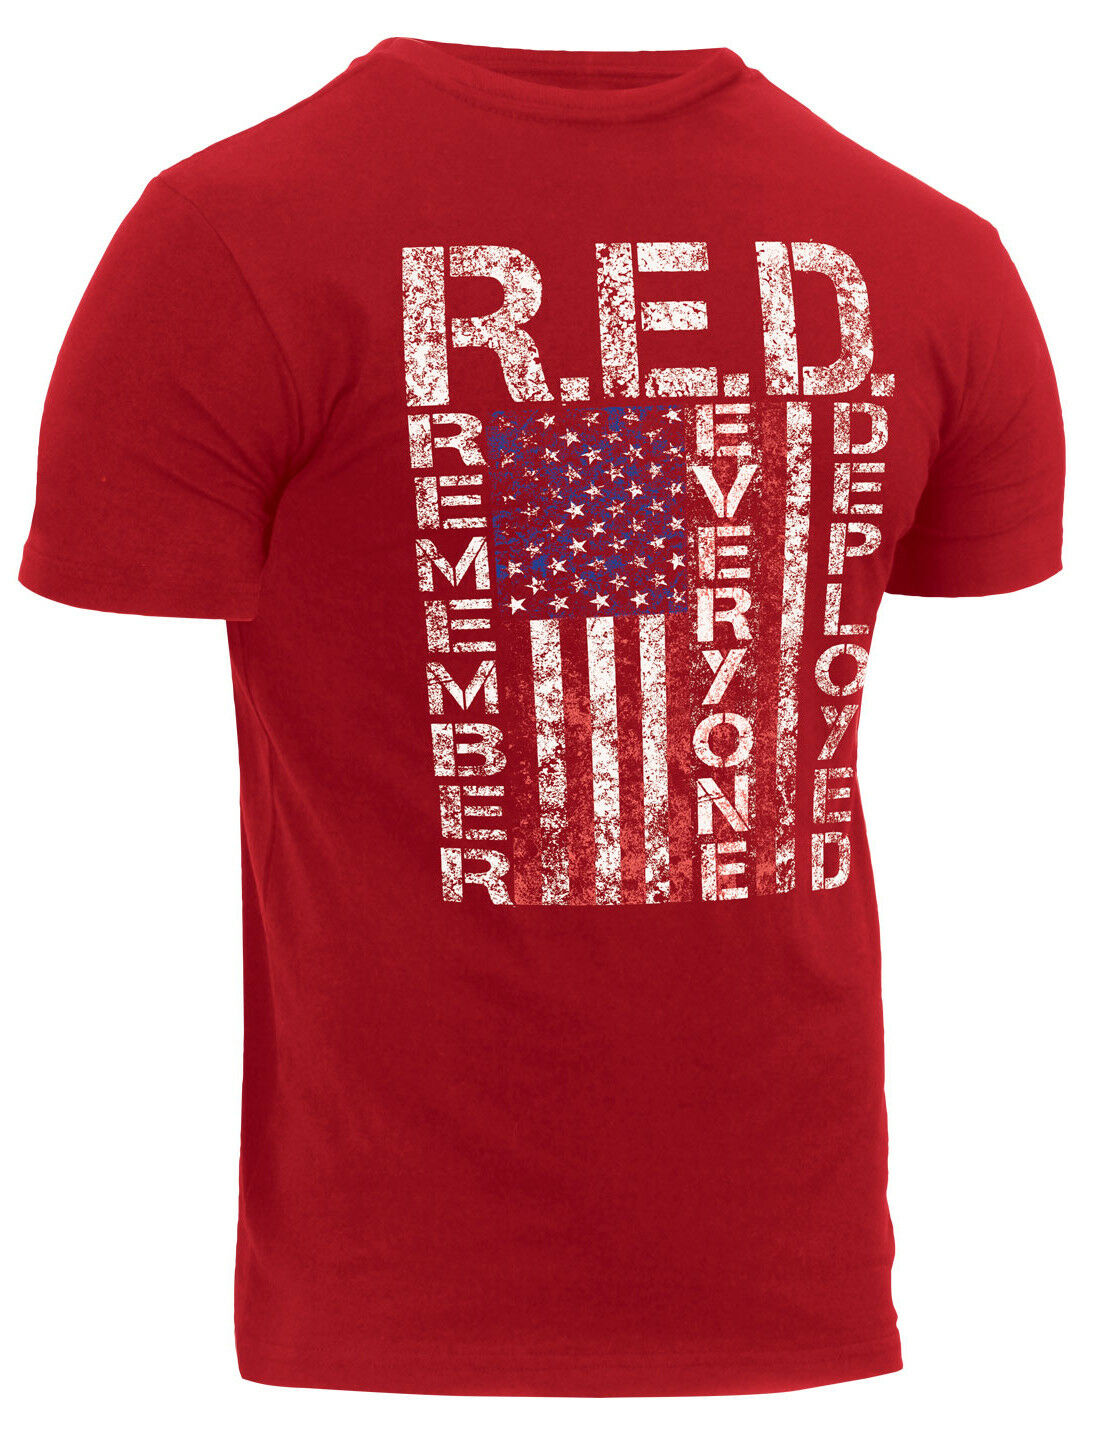 Rothco Athletic Fit R.E.D. (Remember Everyone Deployed) T-Shirt - Red